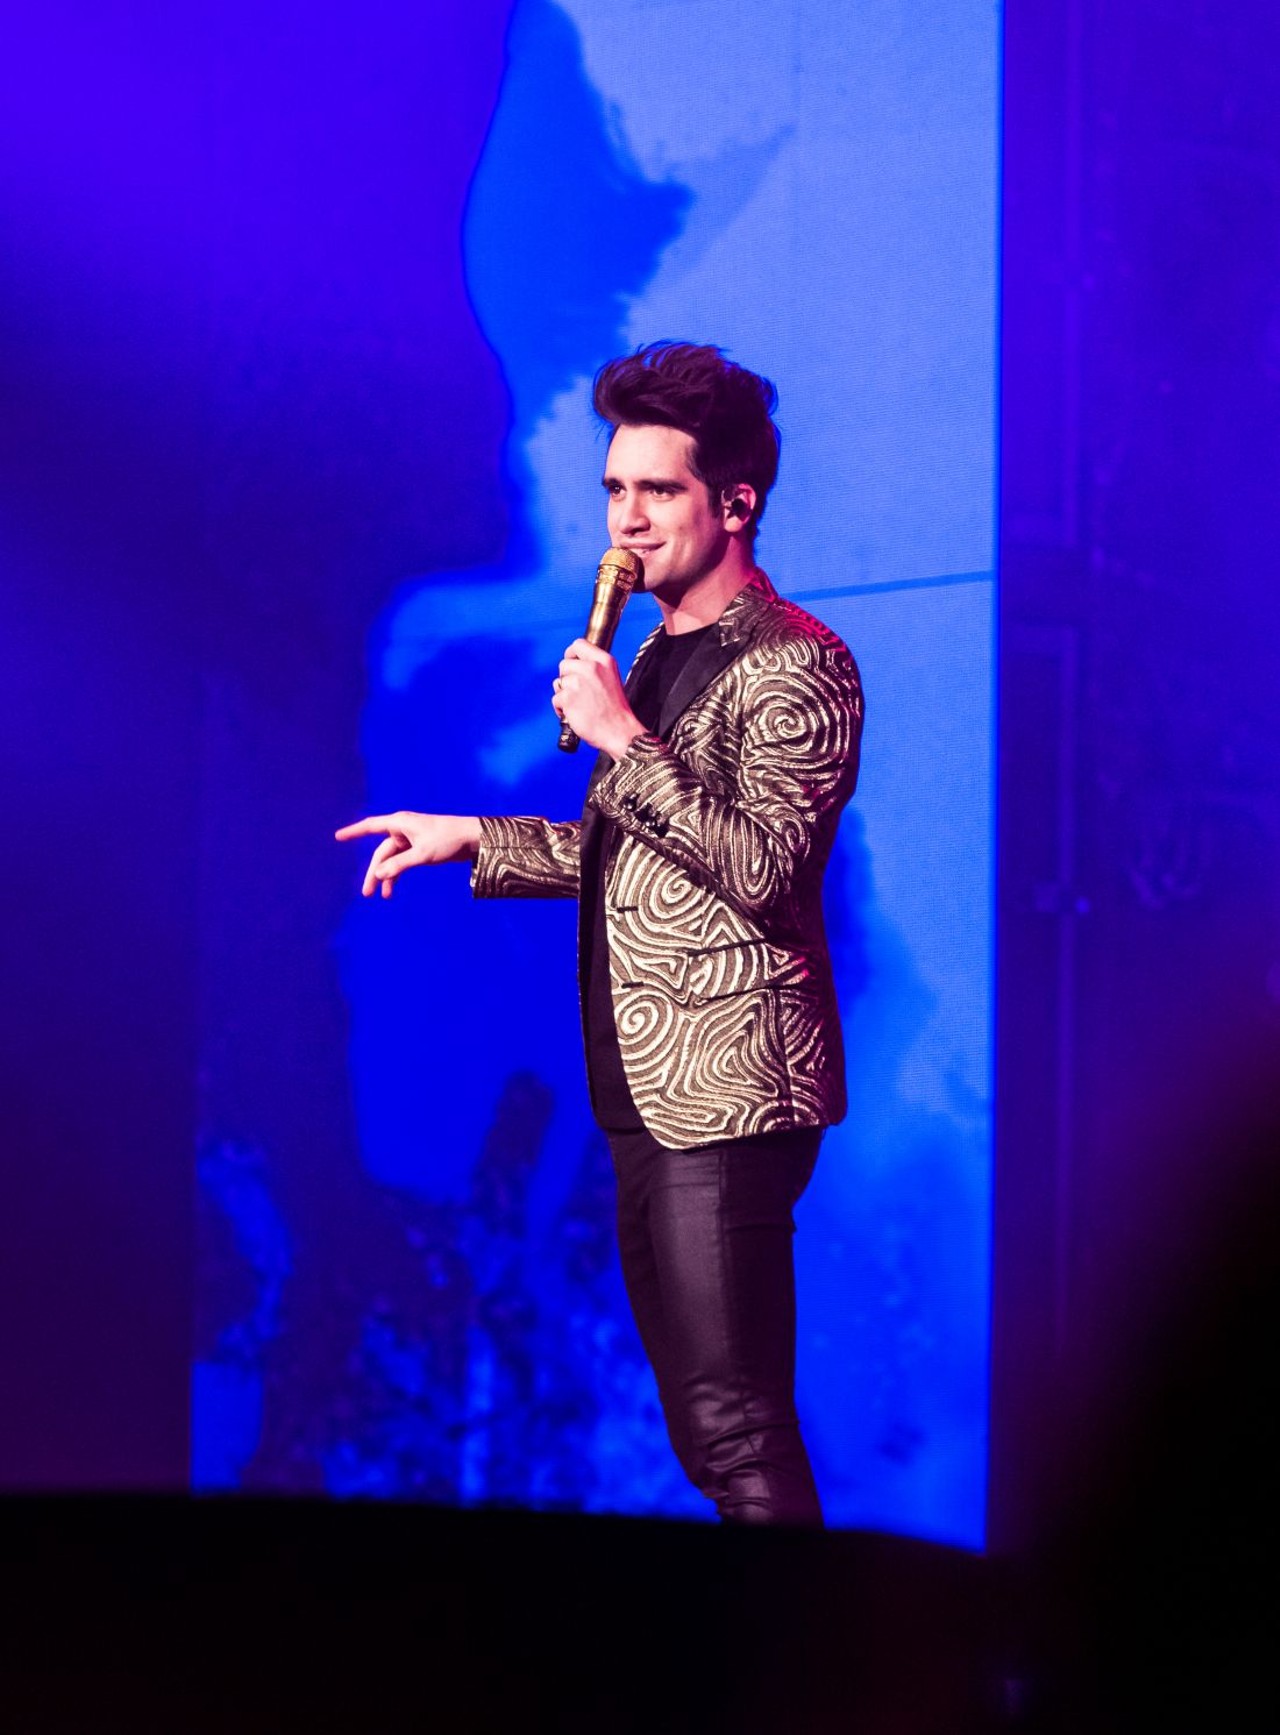 All the Photos From Panic! at the Disco Performing at the Q